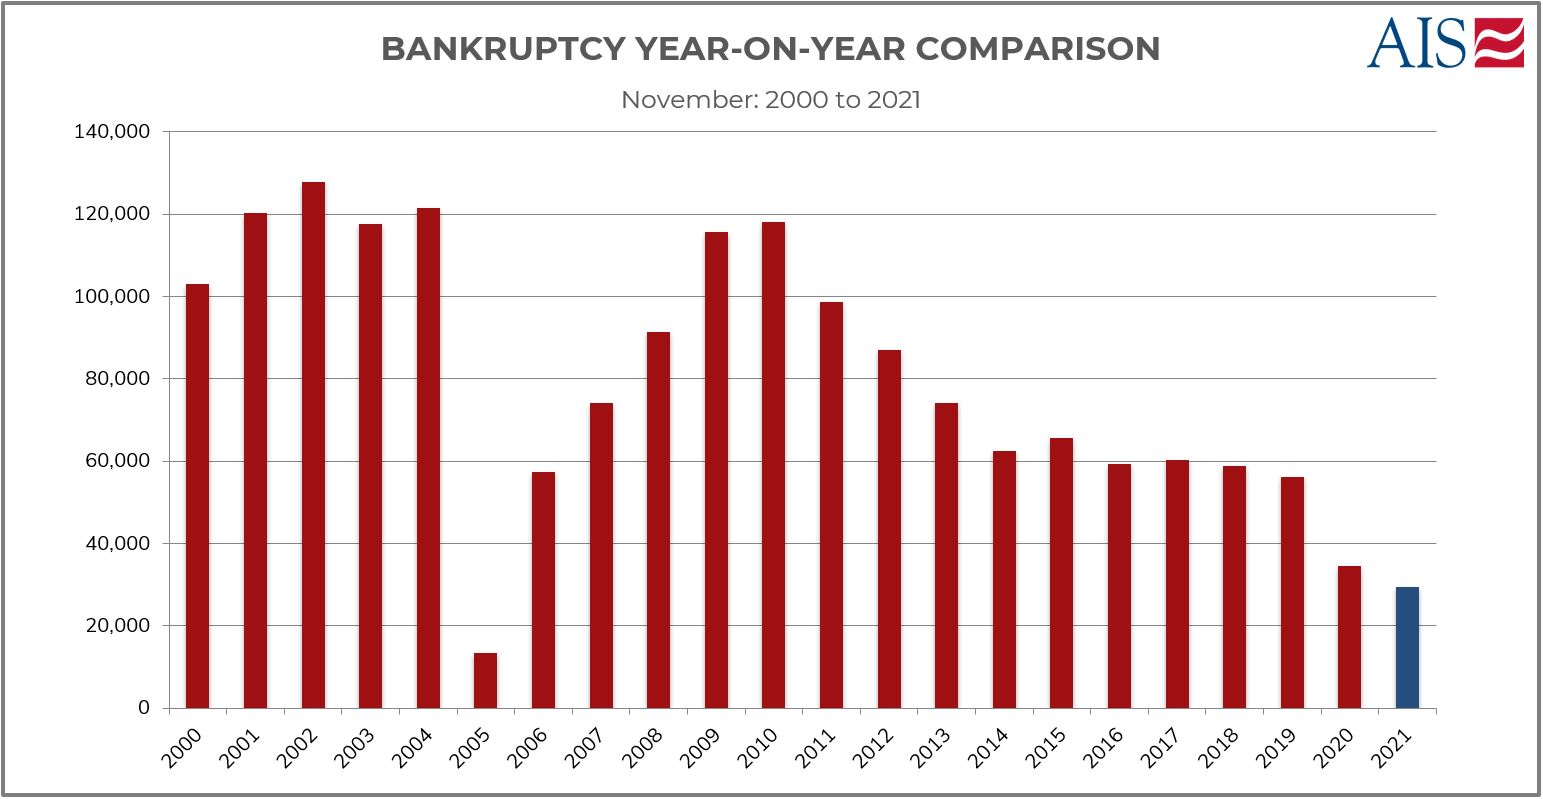 AIS Insight_Nov2021_BANKRUPTCY YEAR ON YEAR COMPARISON-1